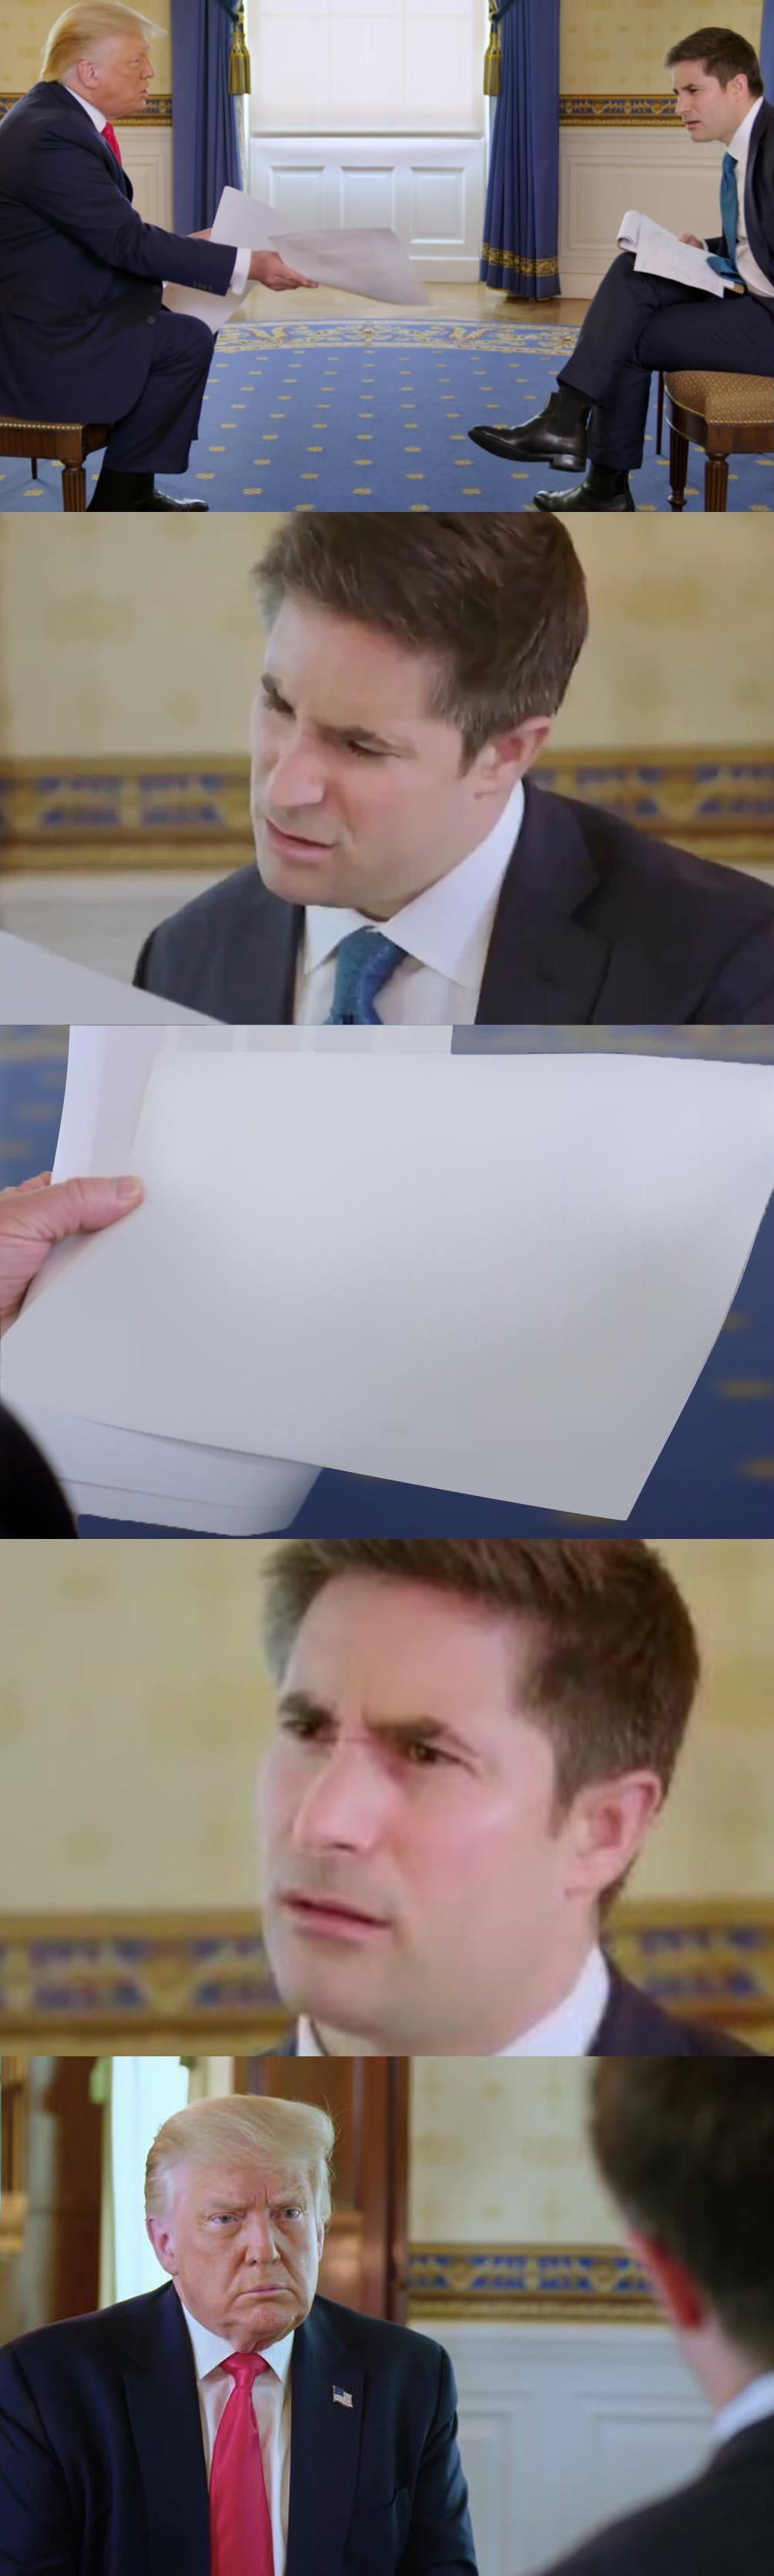 High Quality Trump's Interview Blank Meme Template